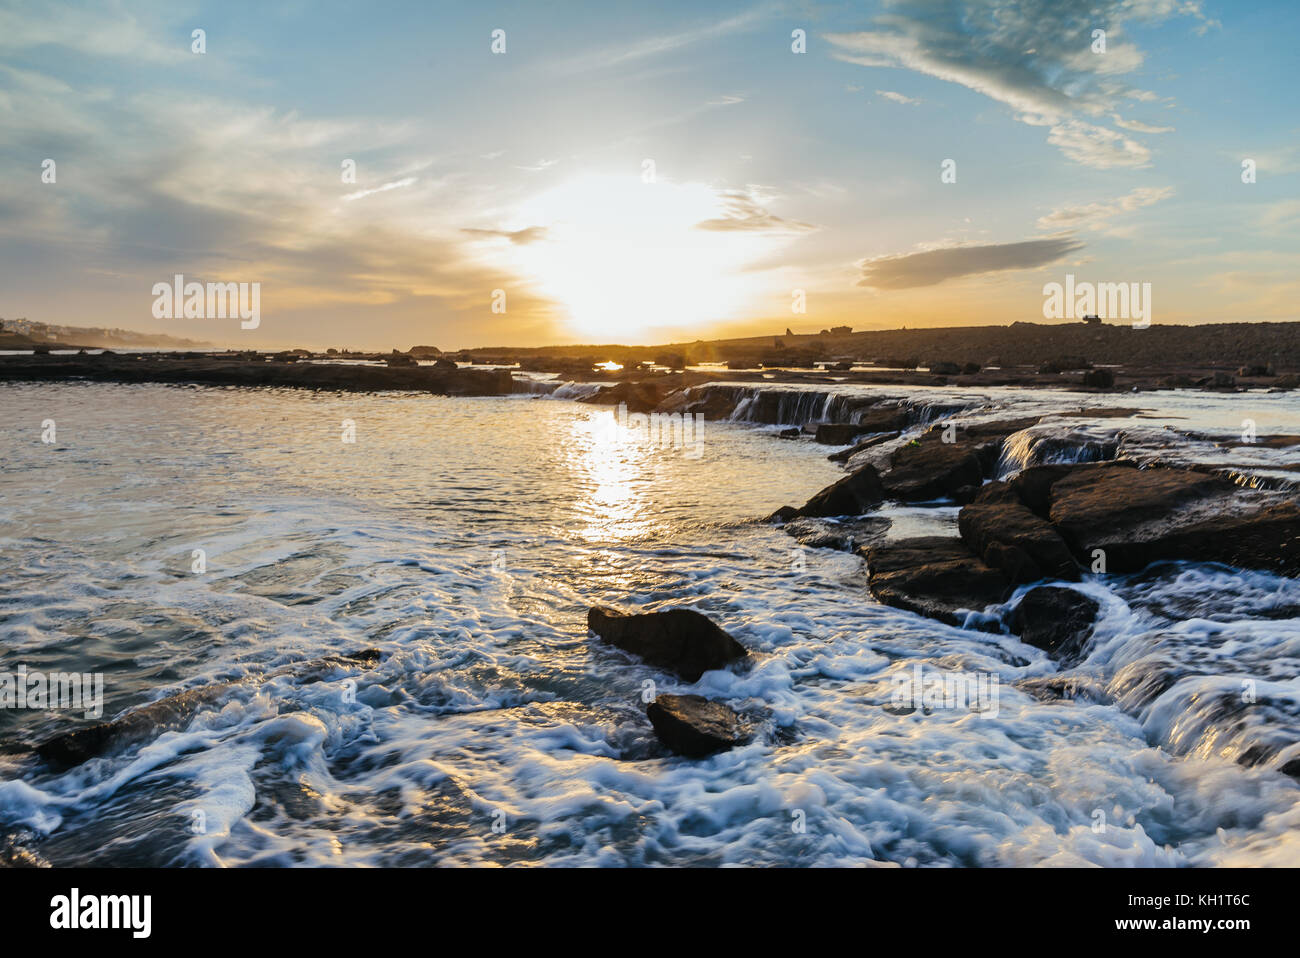 Beautiful sunset at harhoura, rabat, from inside the waters, view of the rocks and the sea Stock Photo